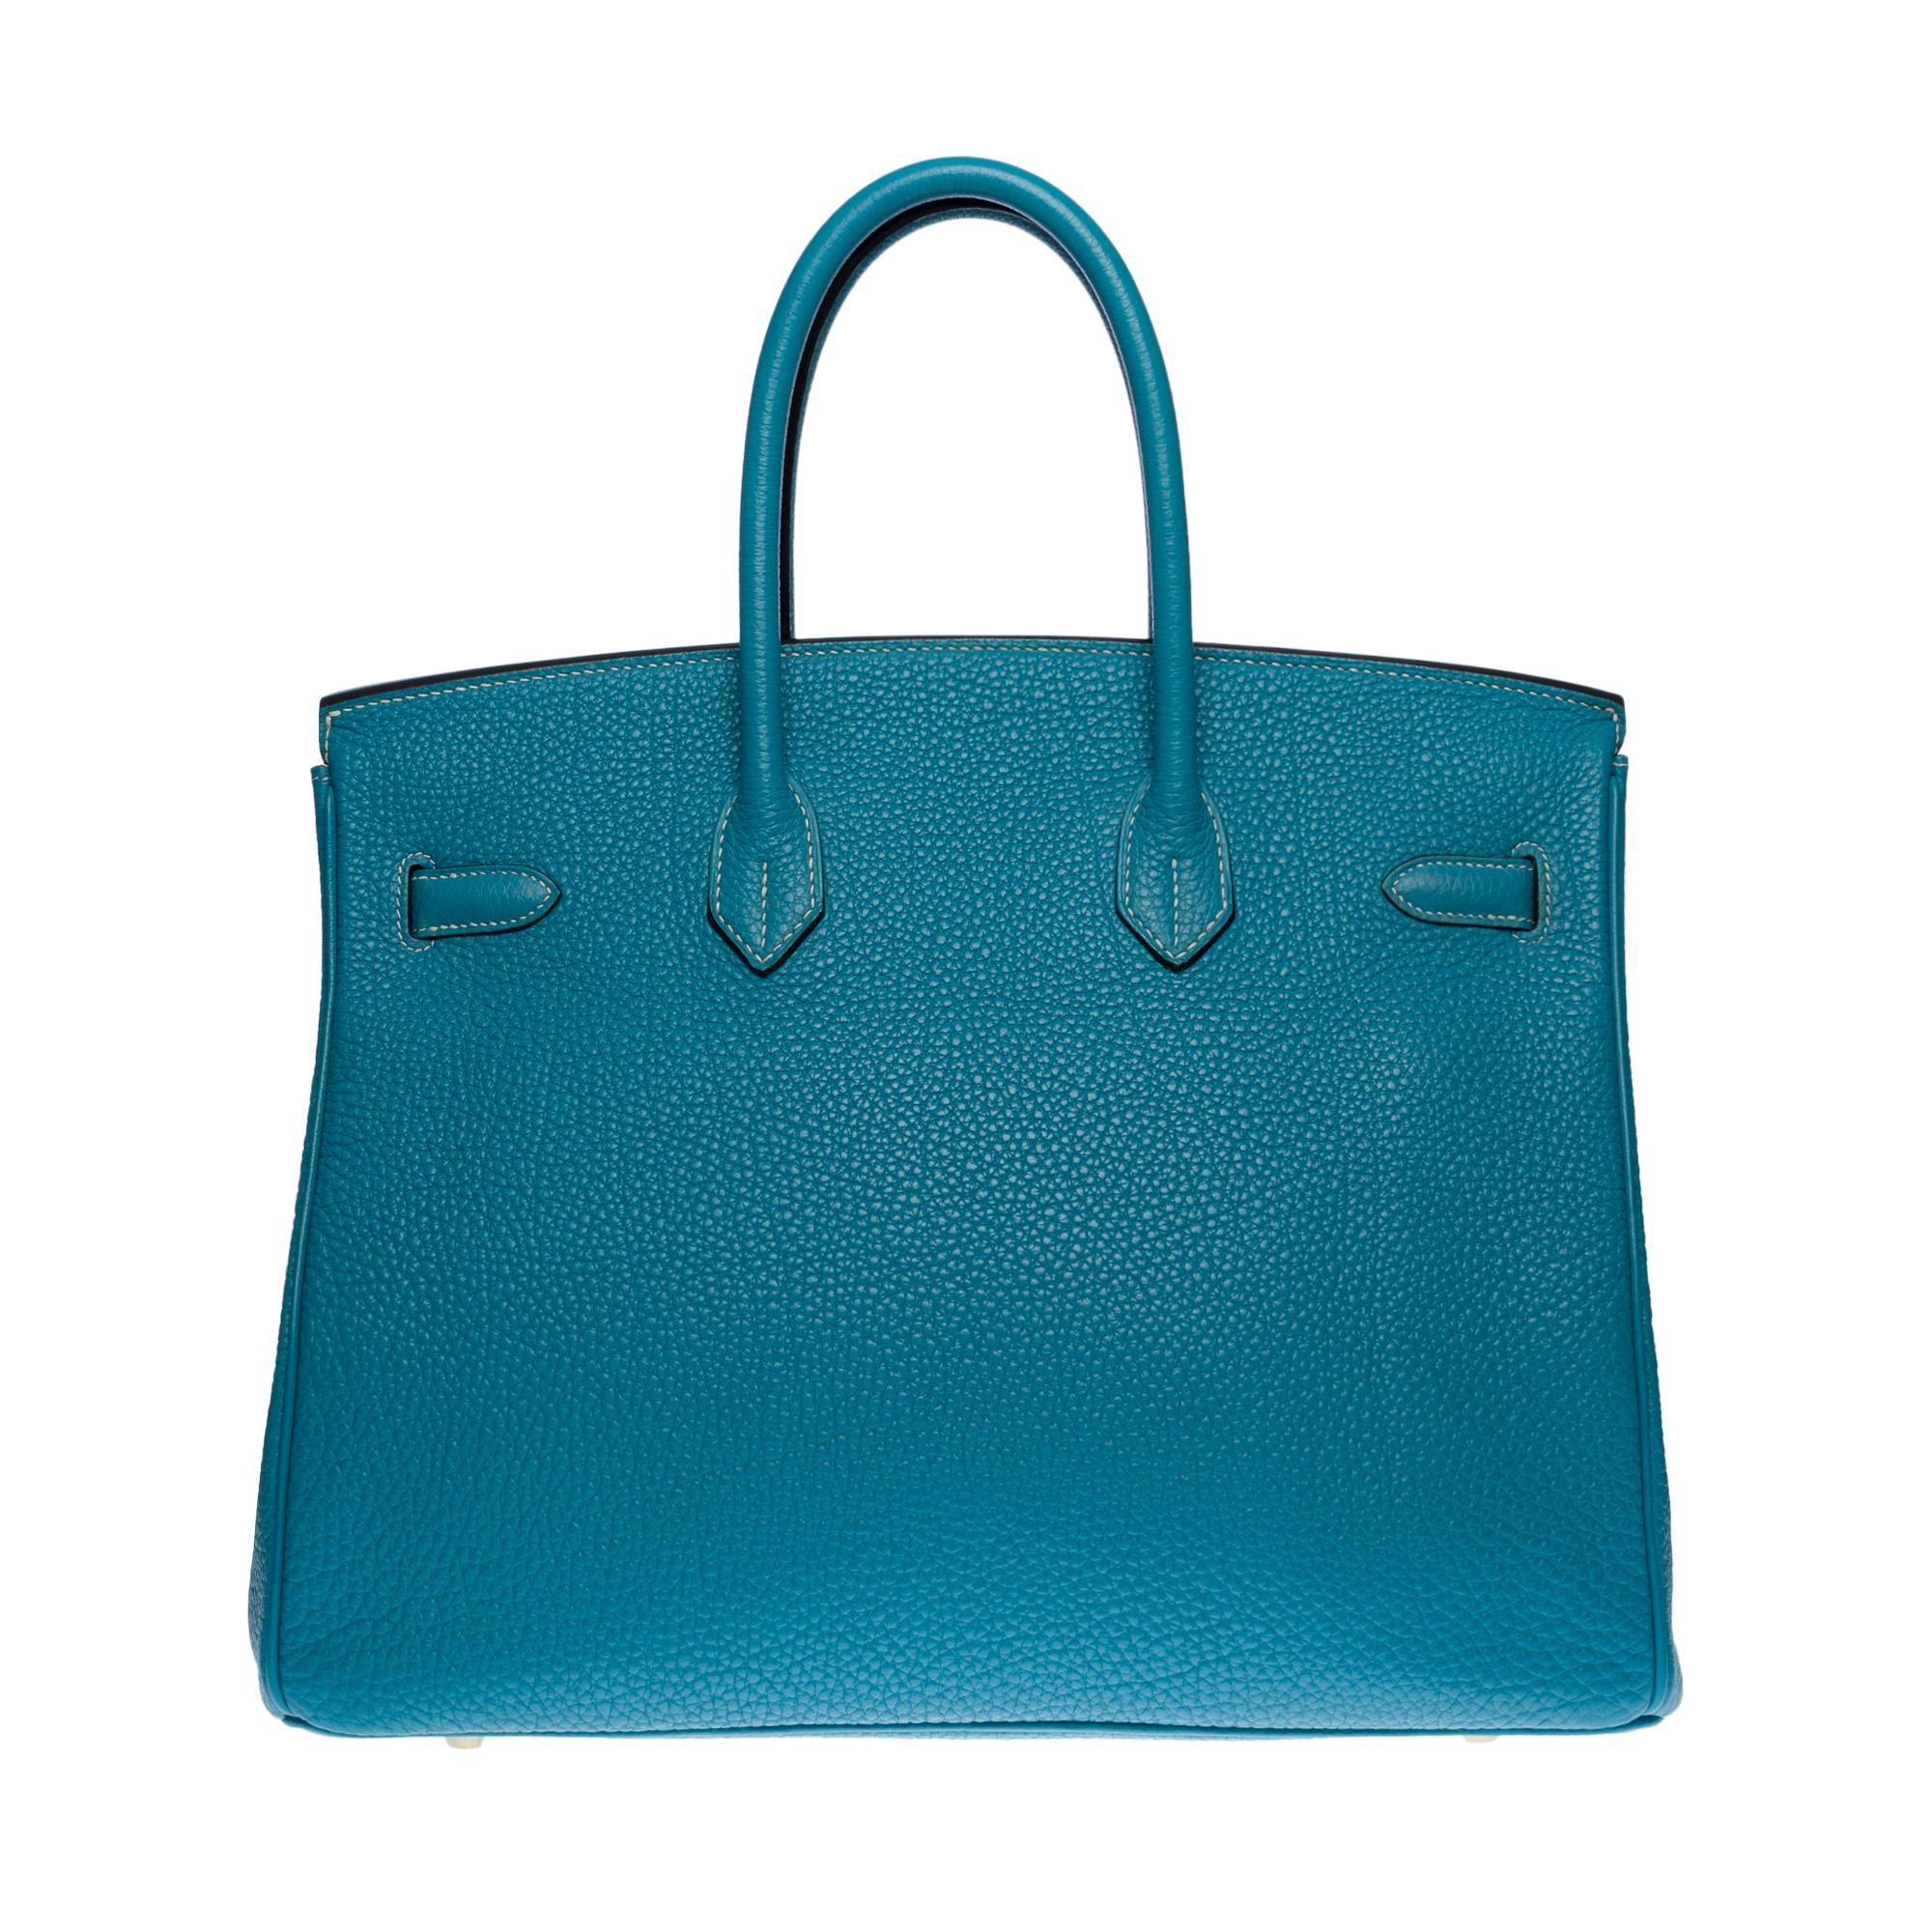 Exquisite Hermes Birkin Handbag 35 cm in Togo blue Saint-Cyr leather with white stitching, gold plated metal hardware, double blue leather handle allowing a hand-carried
Flap closure
Blue leather lining, one zippered pocket, one patch